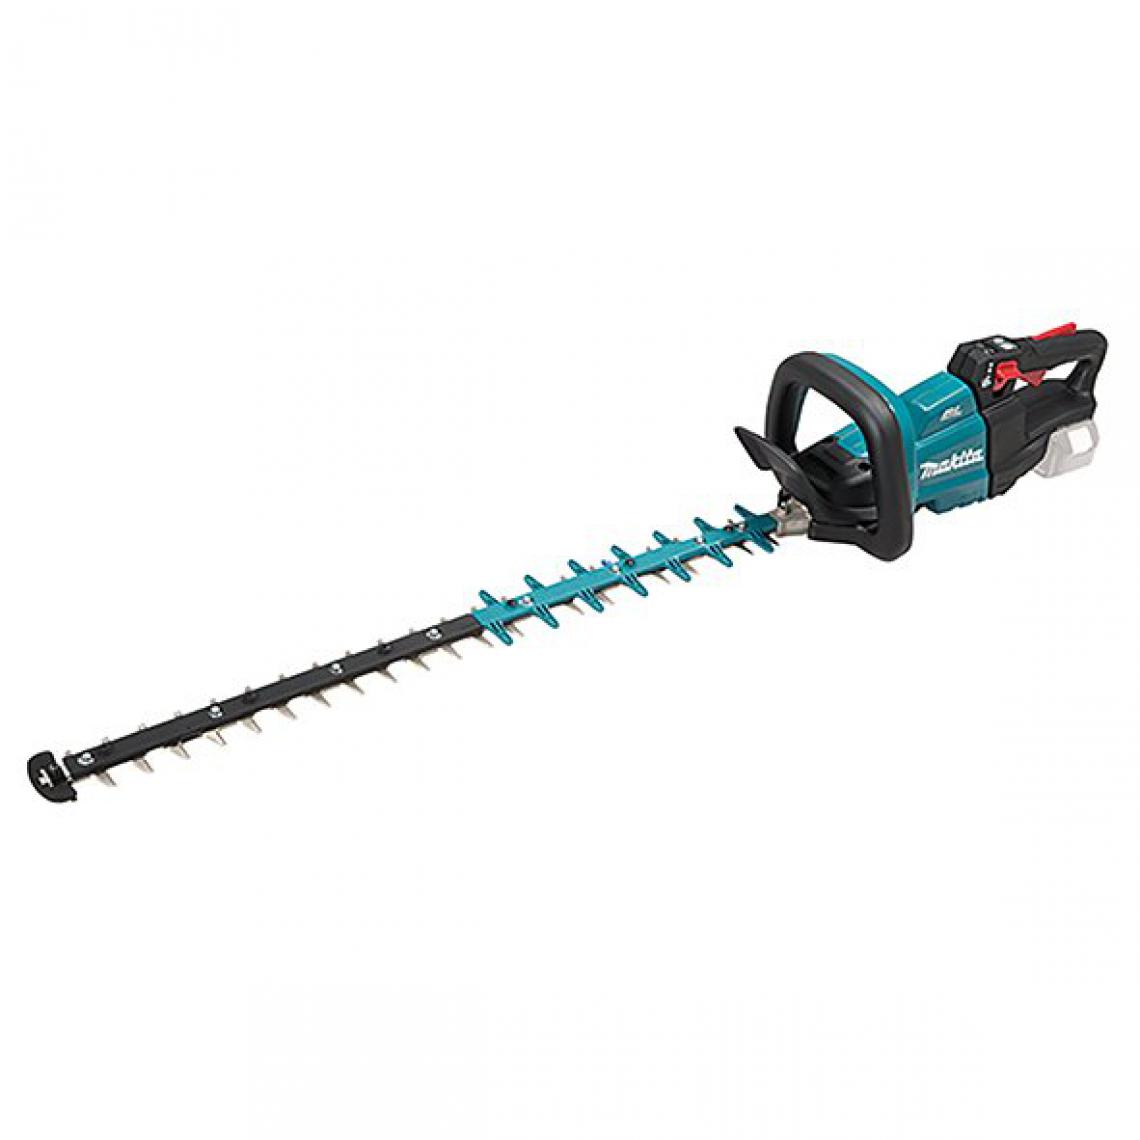 Makita - Makita - Taille-haies 18 V LXT 75 cm sans batterie ni chargeur - DUH751Z - Taille-haies